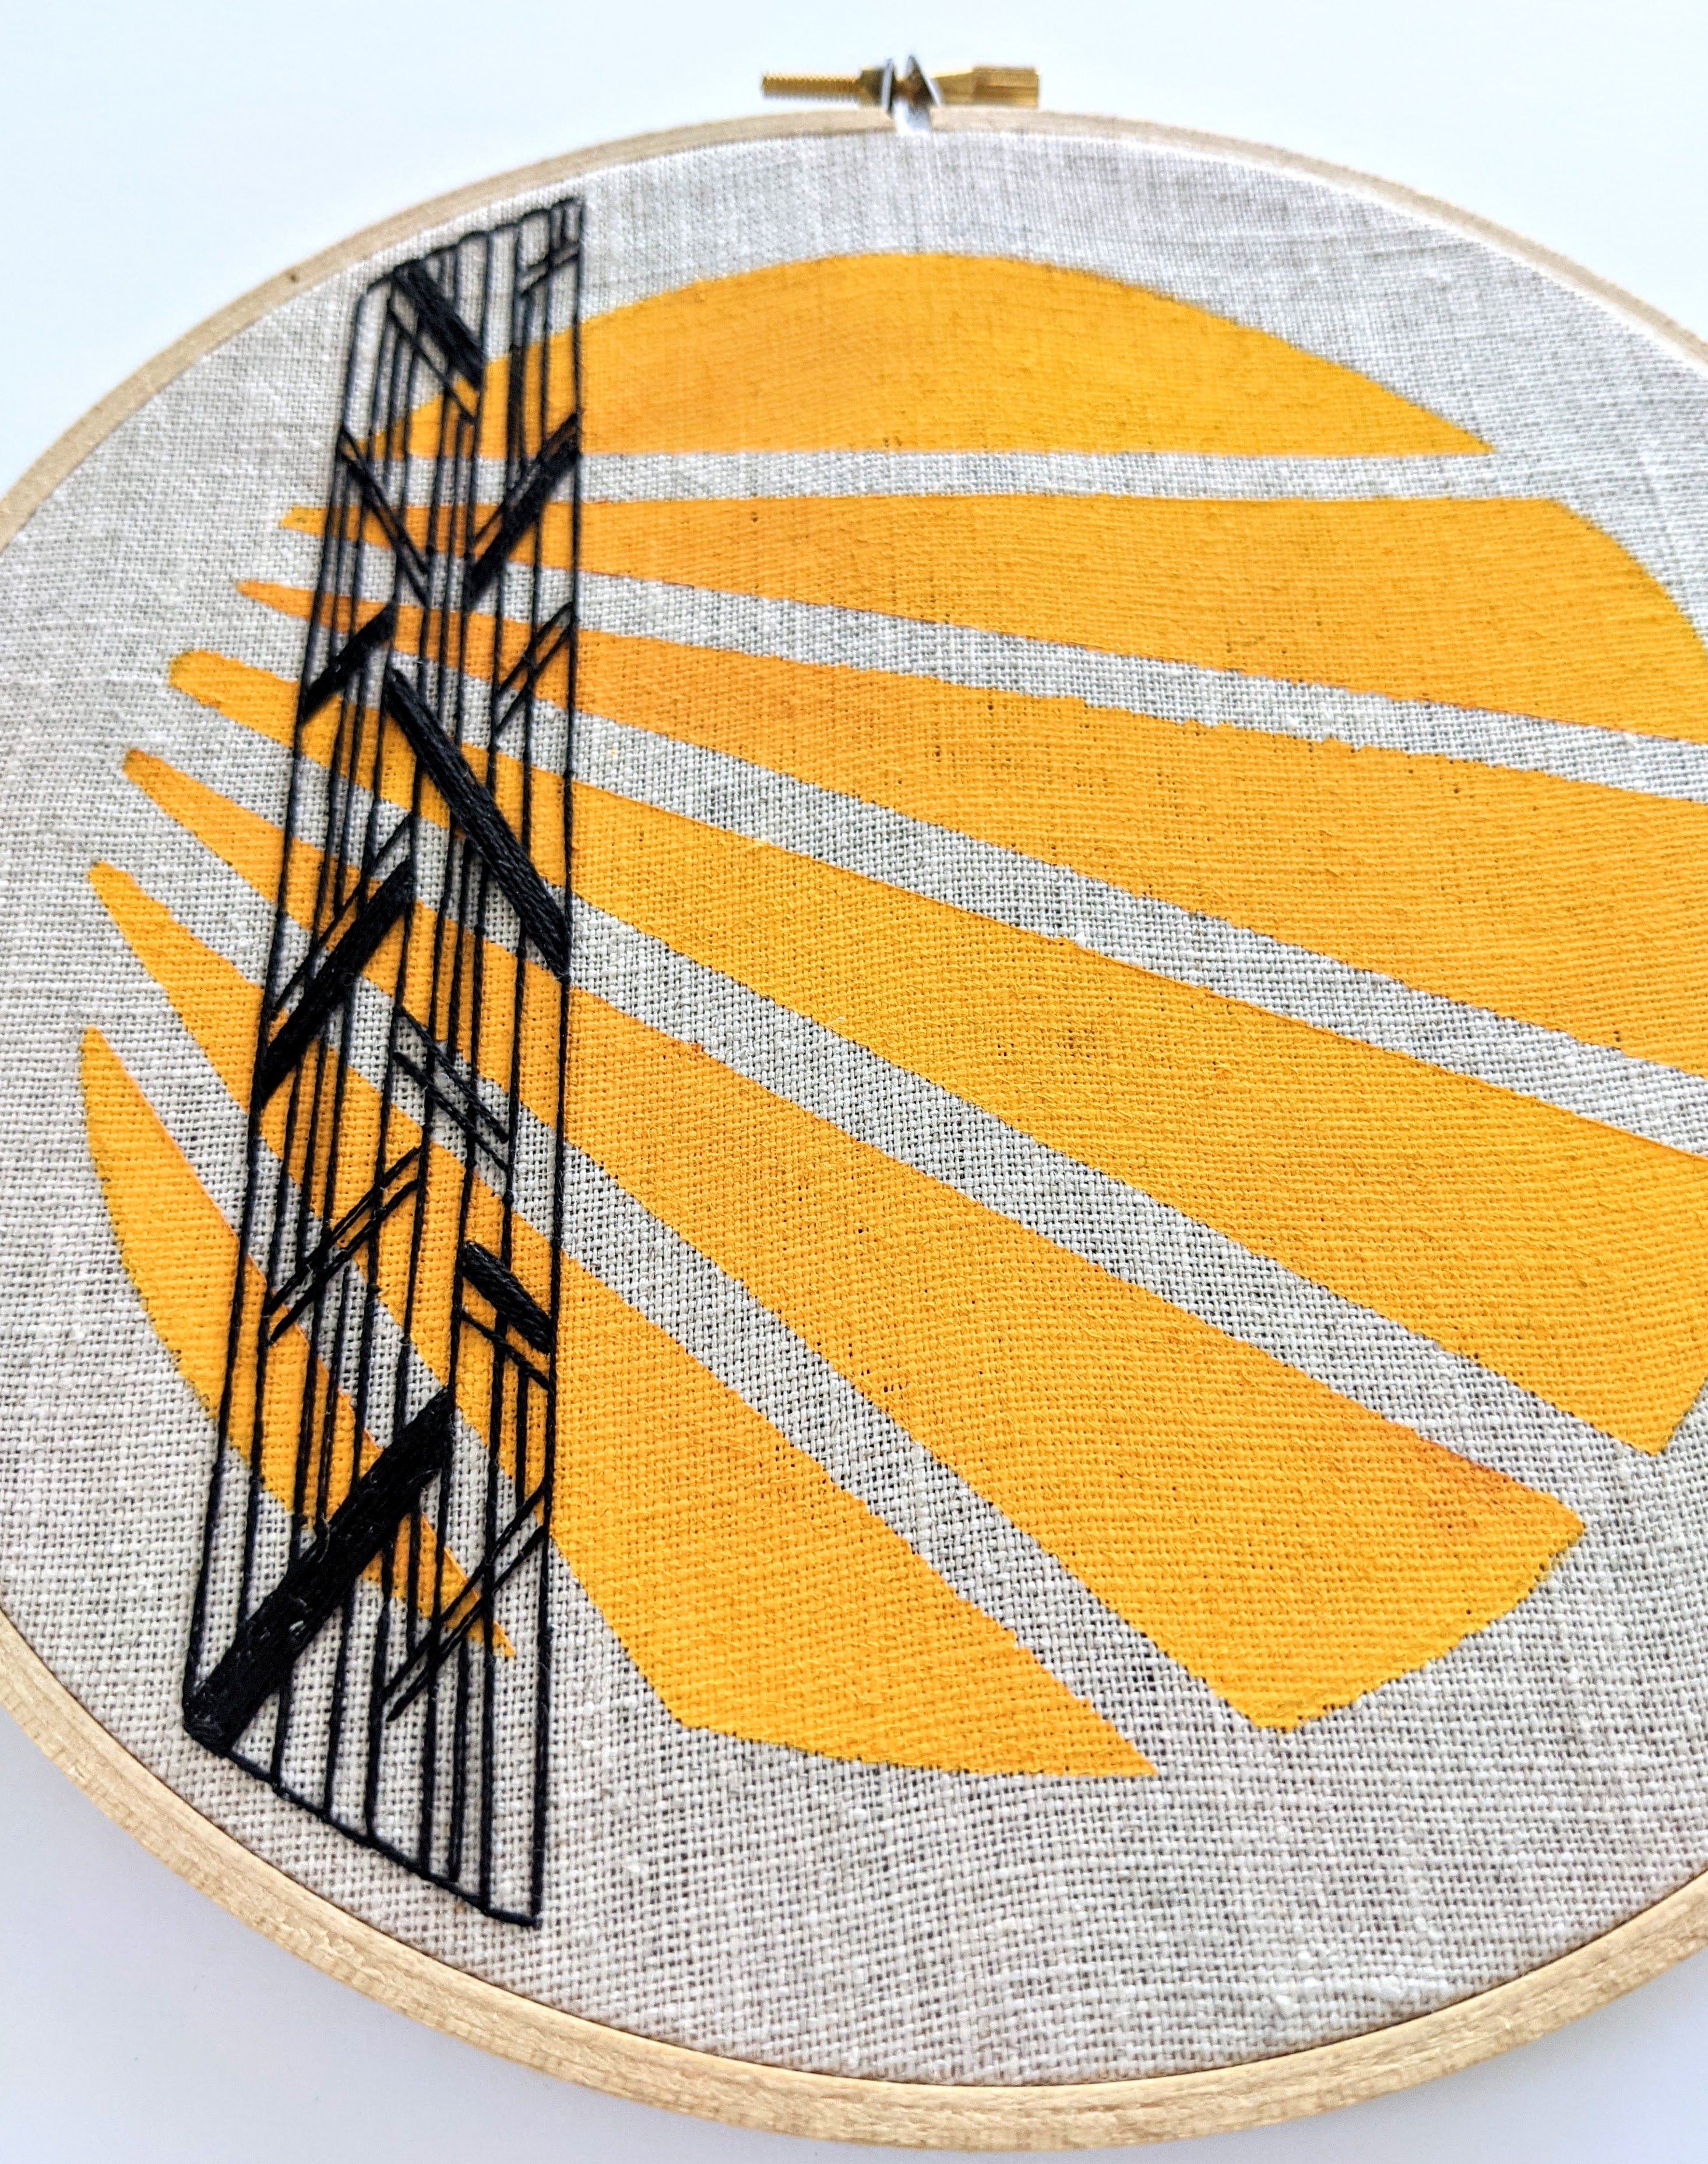 Black and Mustard Vertical Starburst Hand Embroidery